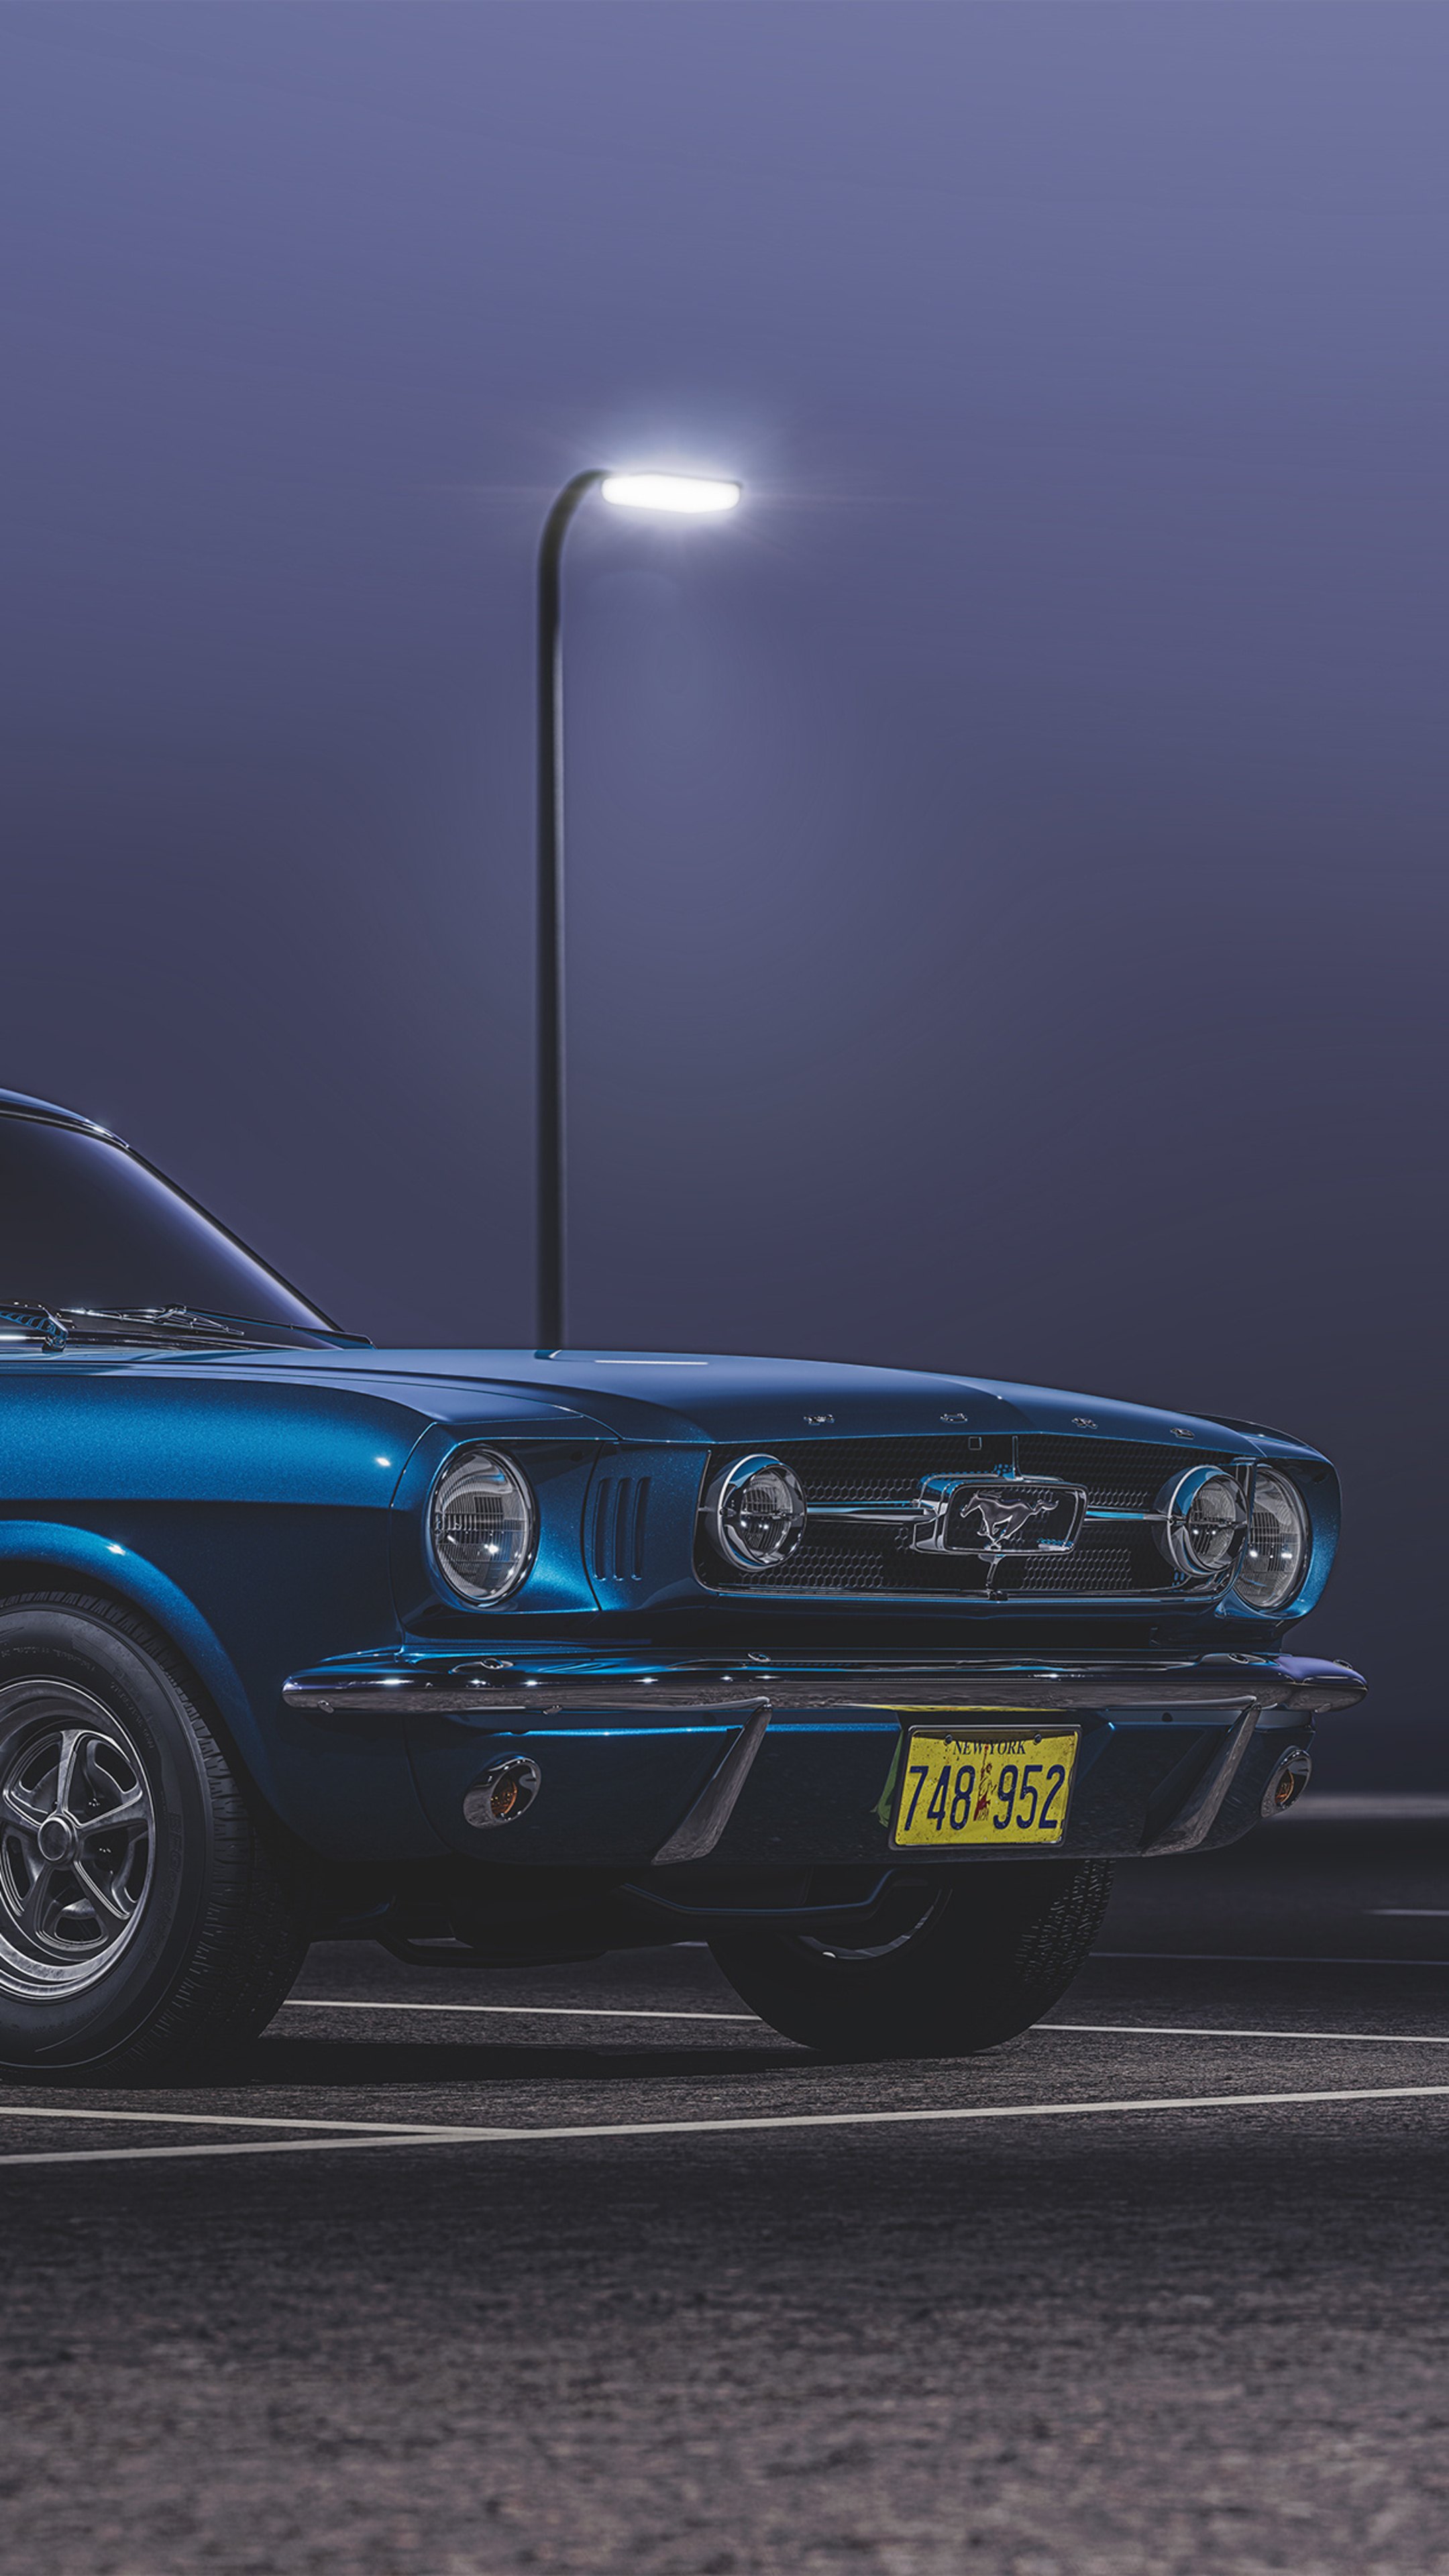 Ford Mustang: 1965 model, The 289 engine gives very good performance and decent fuel economy. 2160x3840 4K Wallpaper.